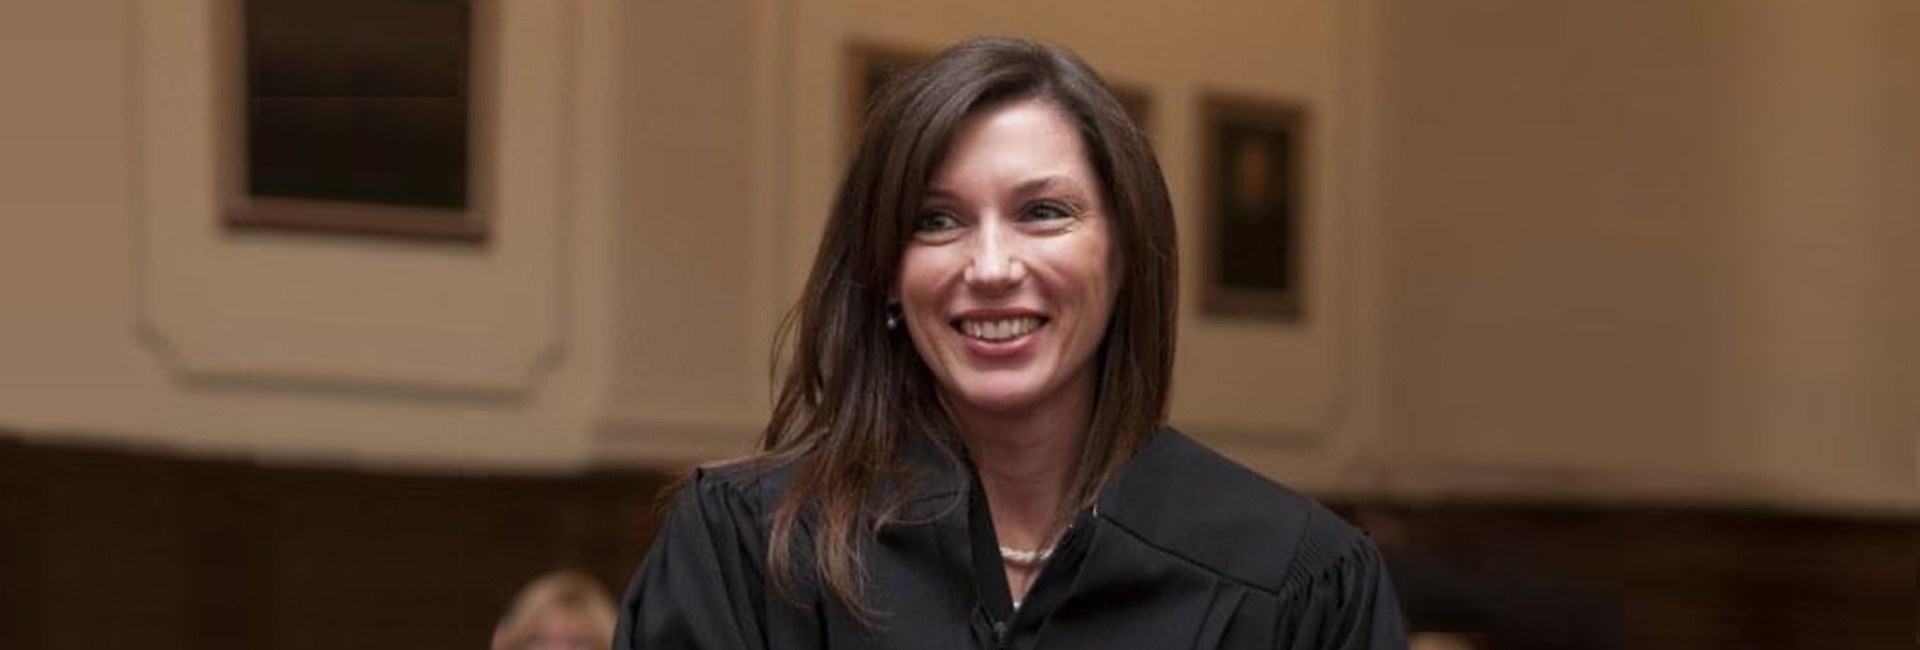 Banner image of Cathleen Rebar. Cathleen is wearing her judge robes.